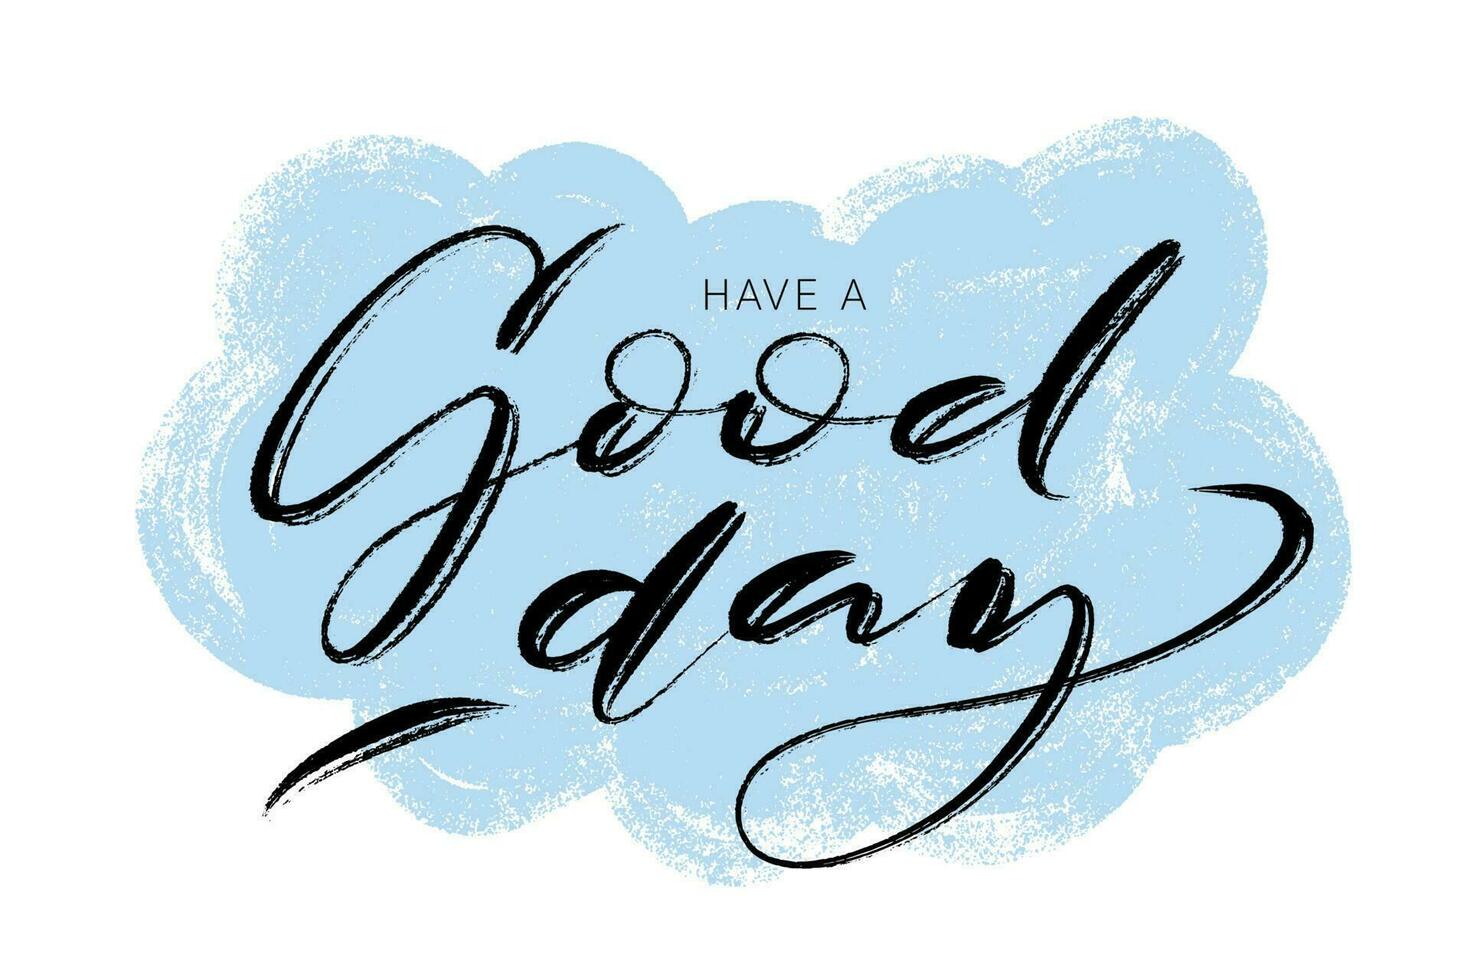 Have a good day vector design template. Ink brush script lettering on hand drawn cloud background. Polite greeting card design, common words template for web, social media, cards, banners.